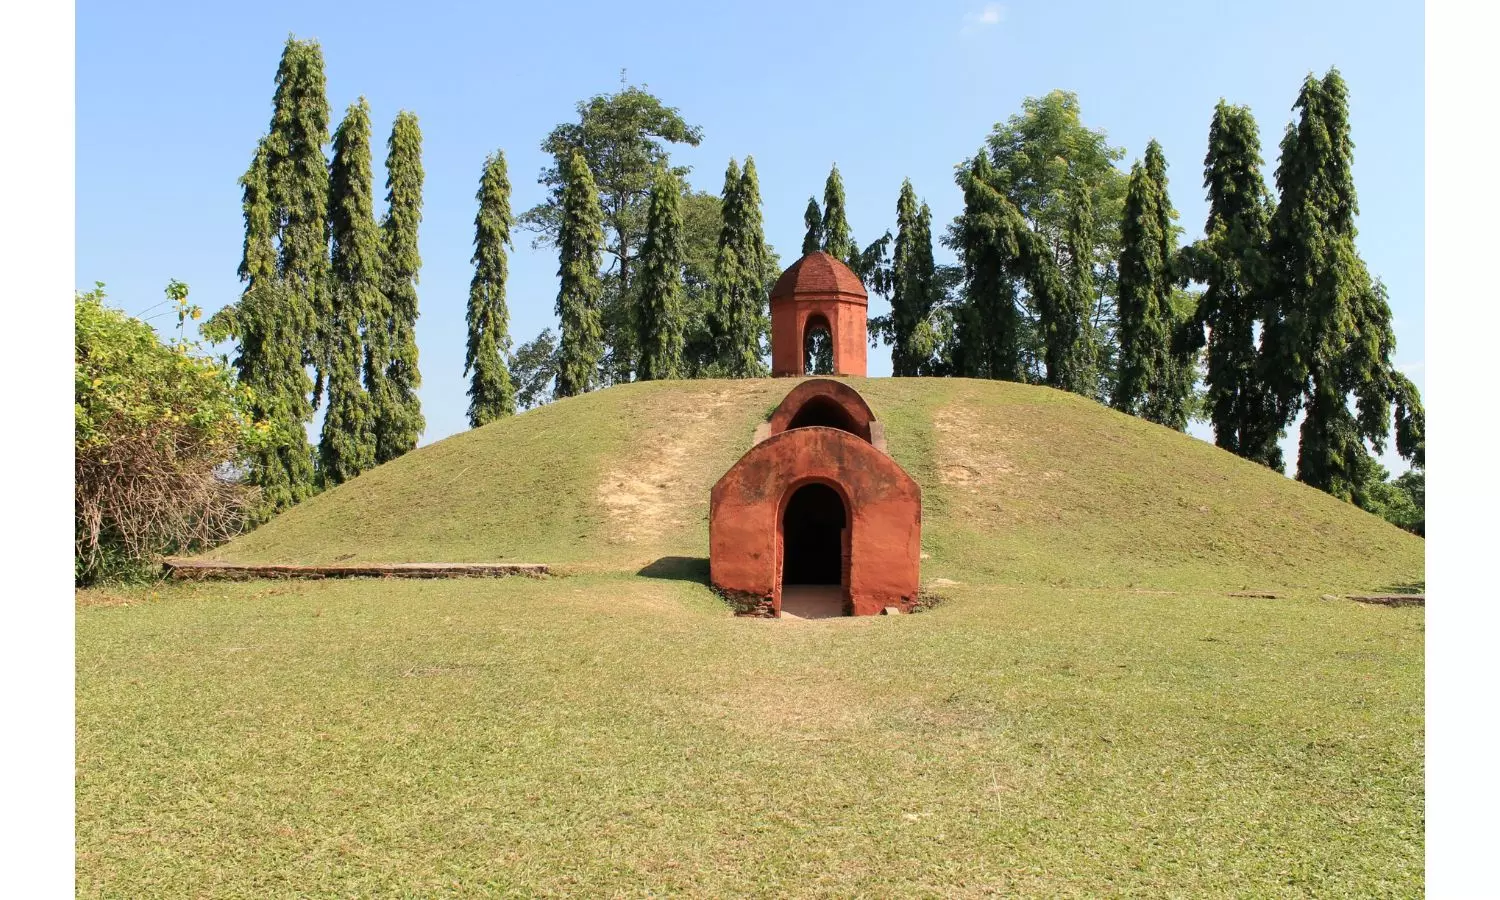 Ahom Moidam Recommended For Inclusion In UNESCO World Heritage List